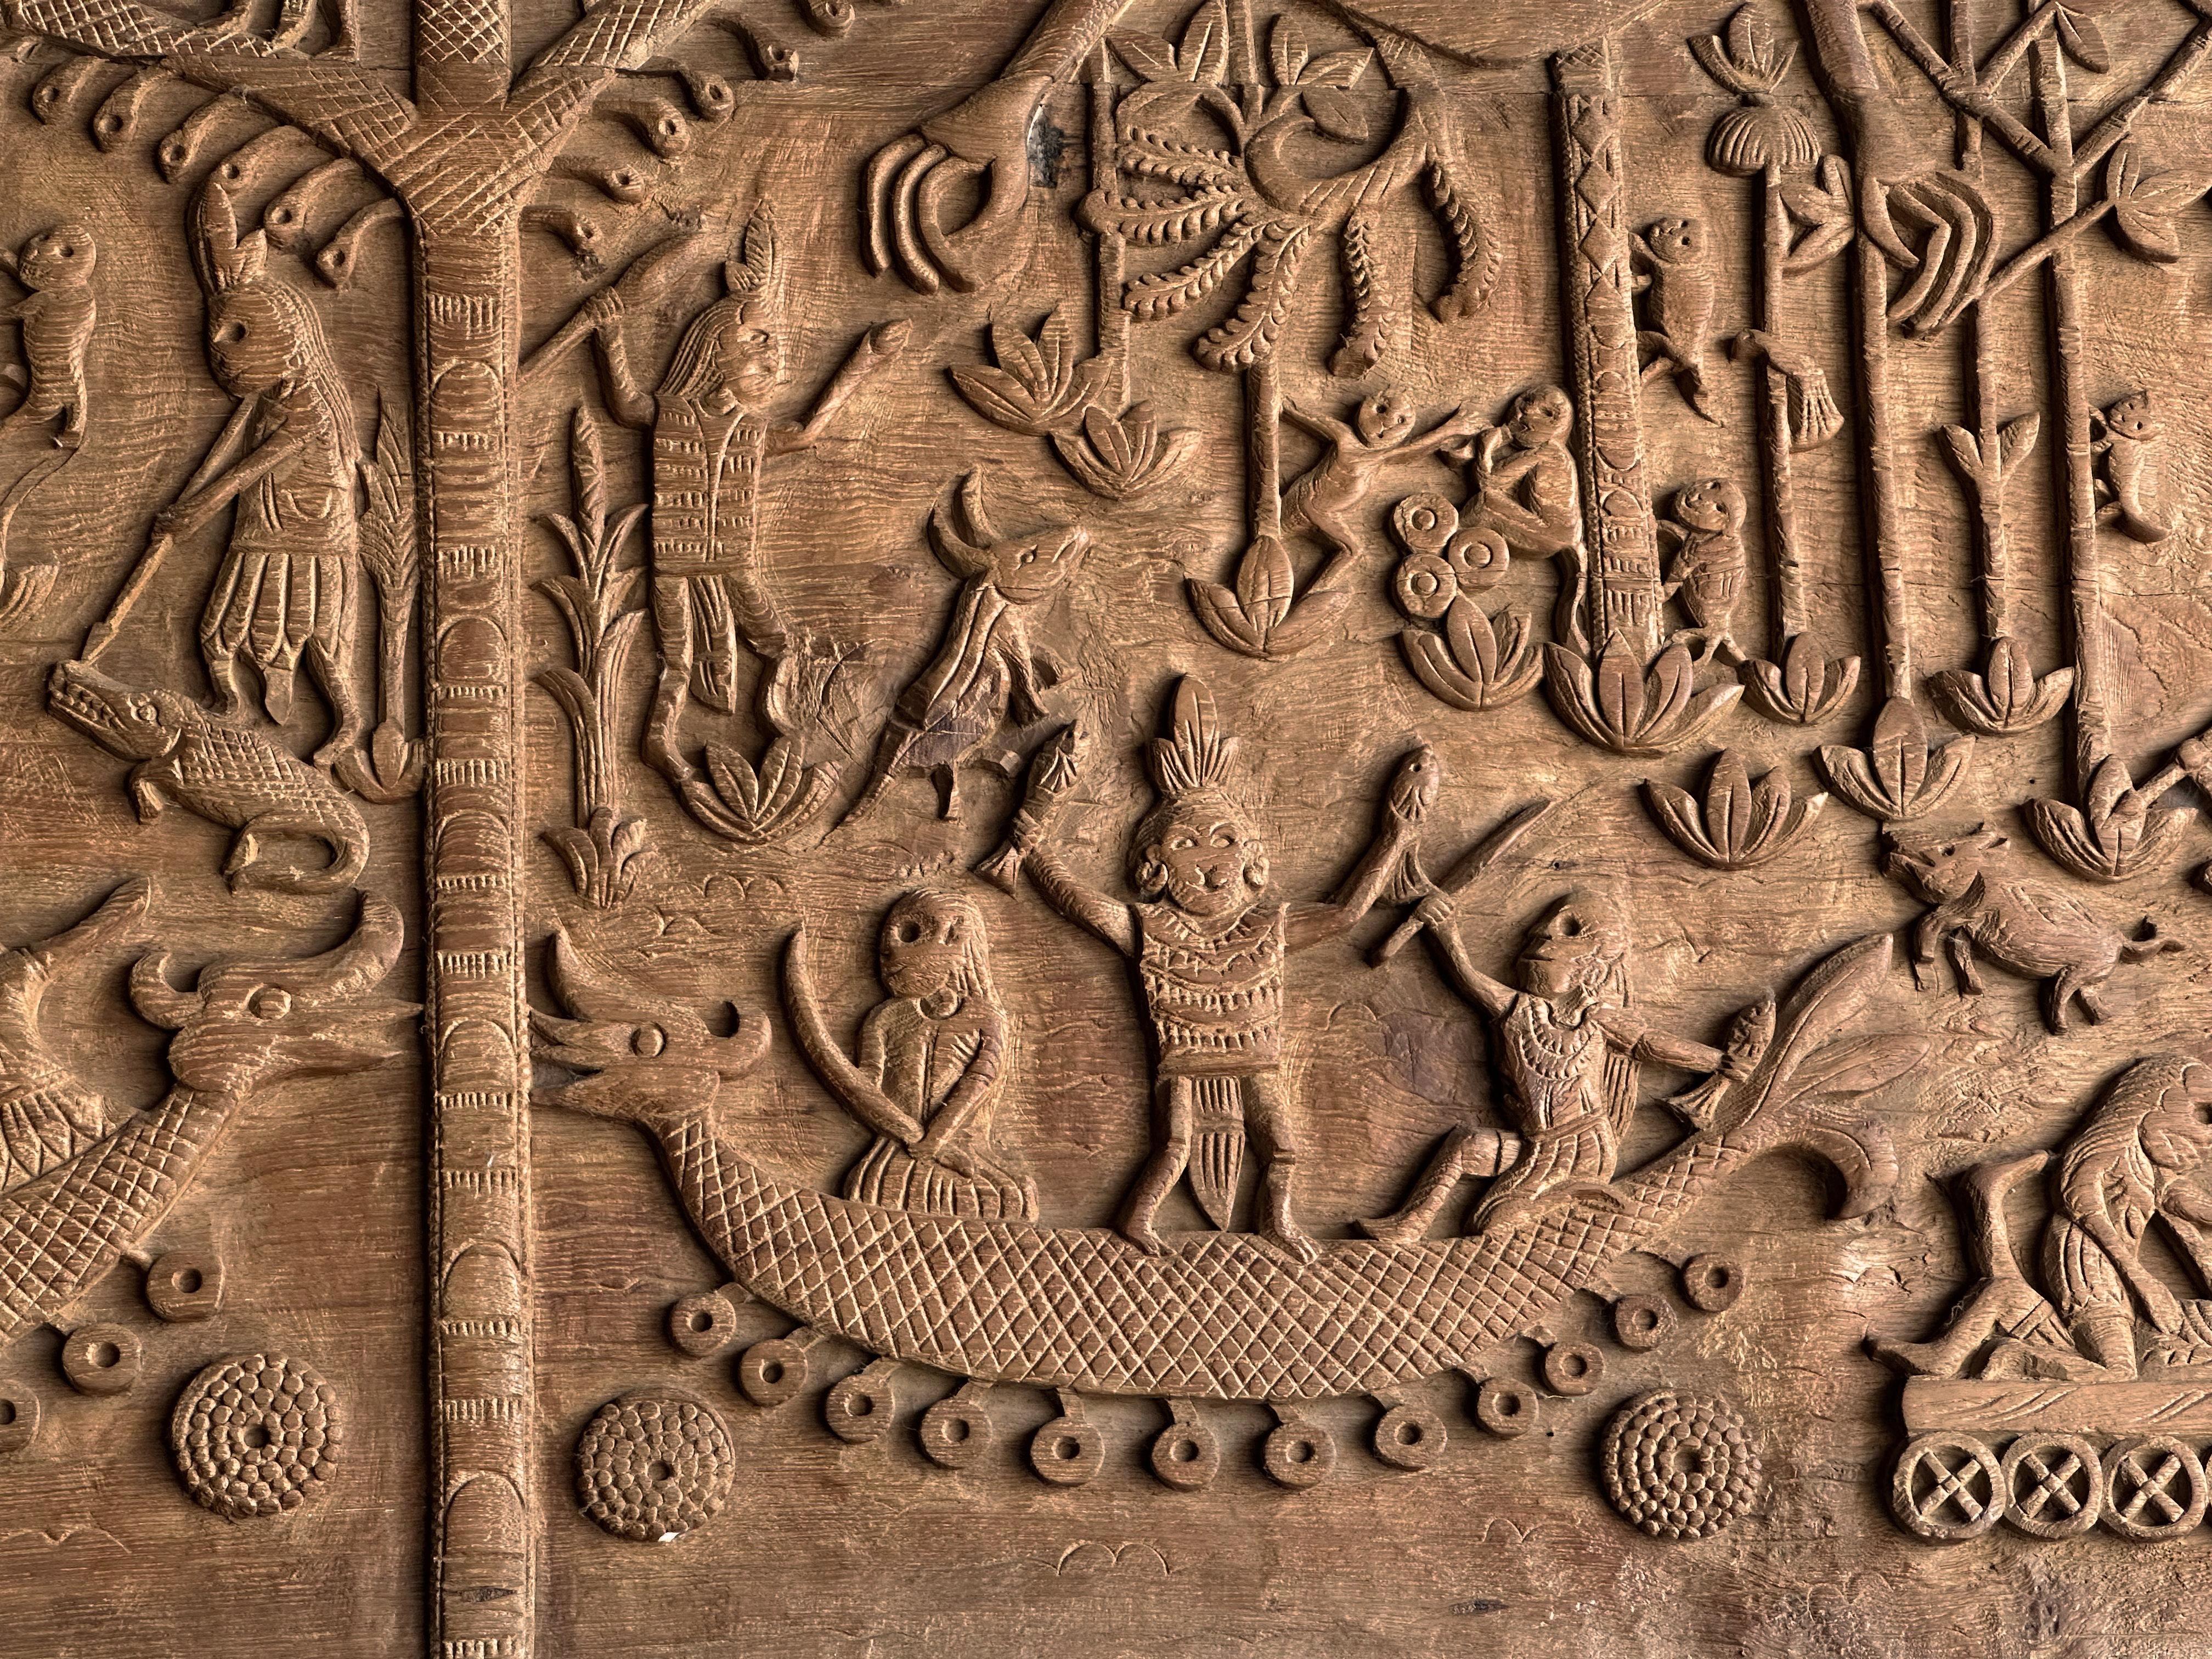 Hand-Carved Teak Wood Sculpture Panel Depicting Dayak Mythology In Good Condition For Sale In Jimbaran, Bali